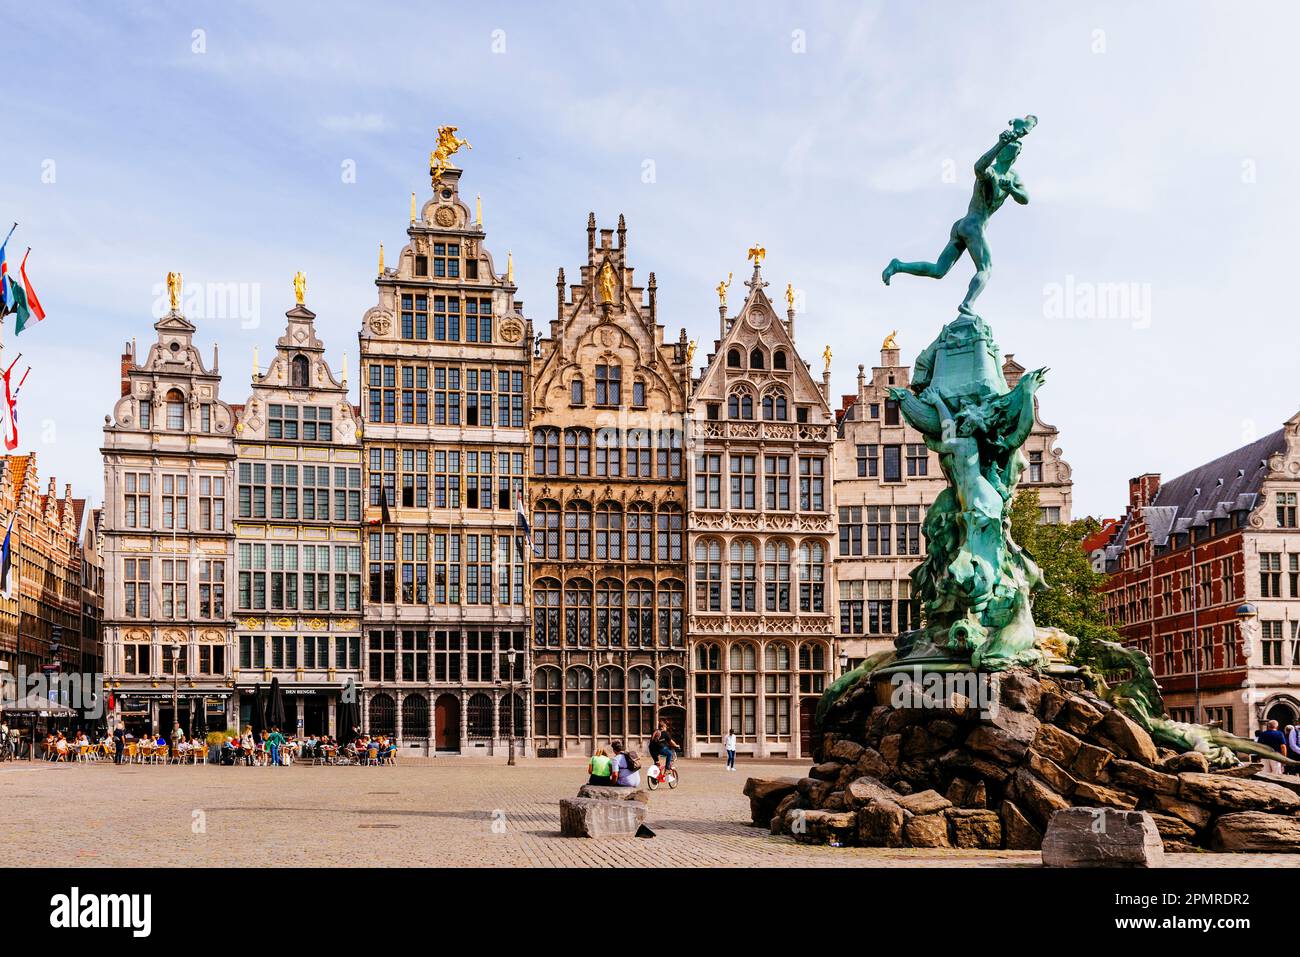 Guild houses in the Grote Markt with the Brabo Fountain. Guild Houses in Grote Markt, is a row of guild houses initially built around 1580. During the Stock Photo